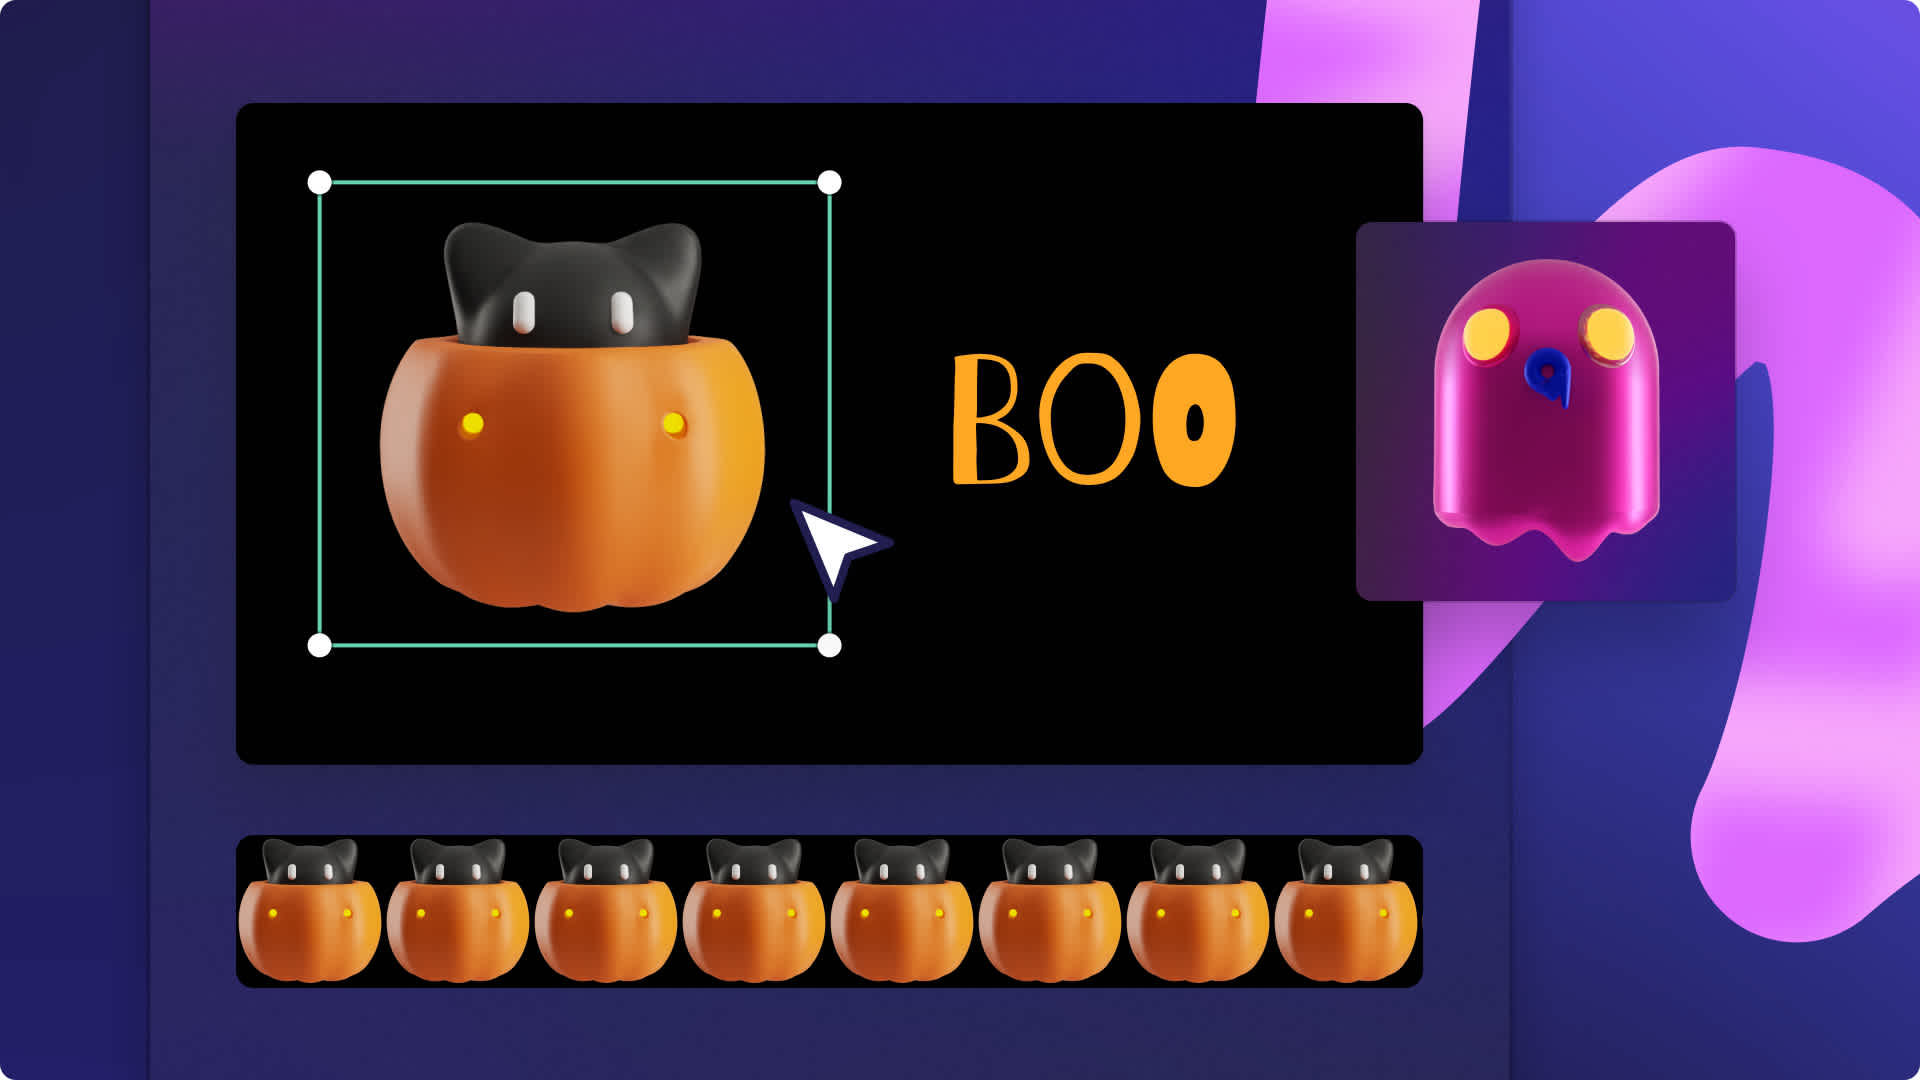 An image of Clipchamp editor with a pumpkin and ghost emoji.